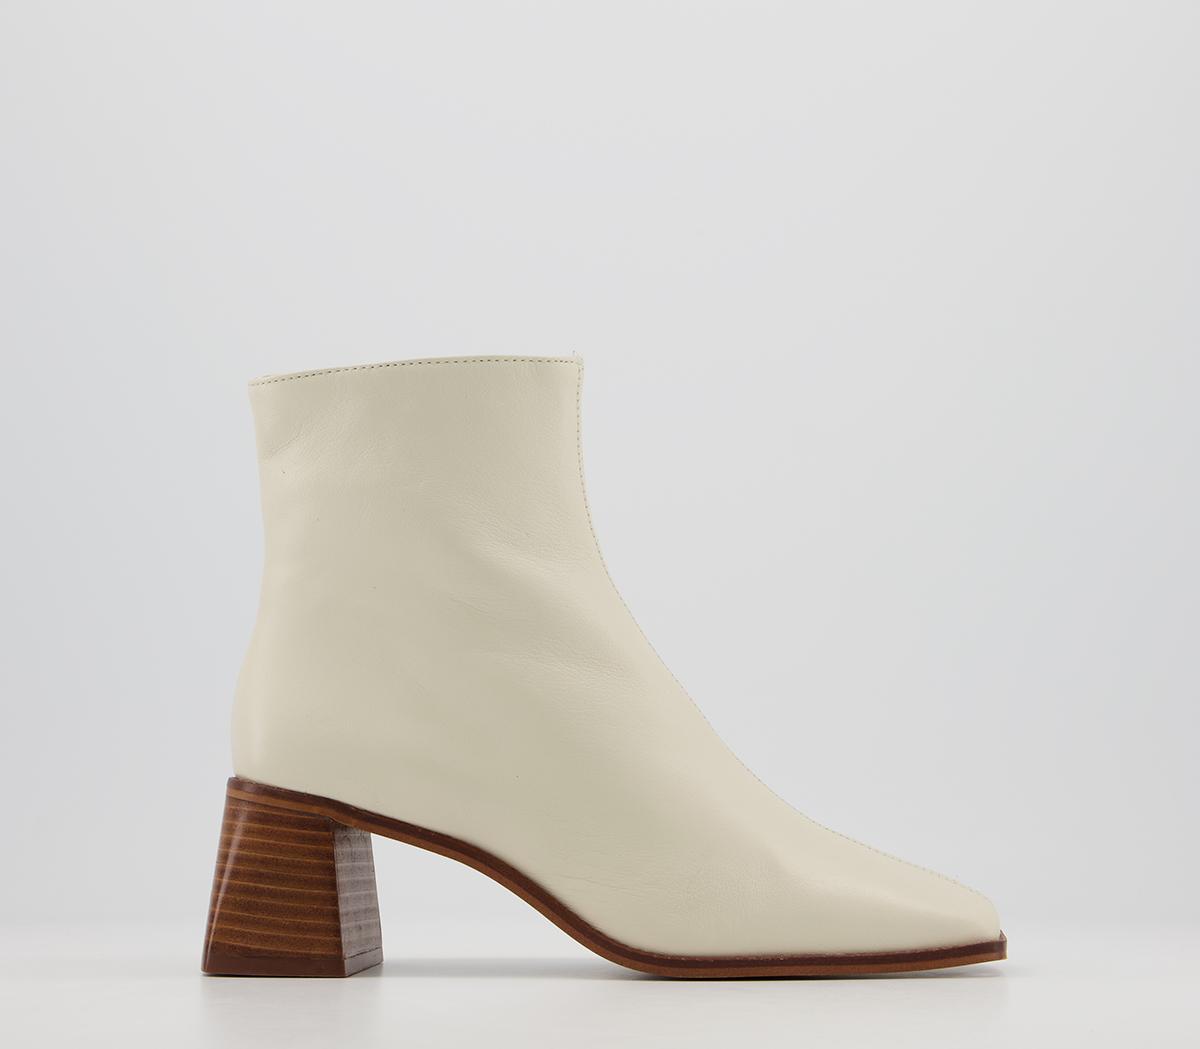 OFFICEAbbie Smart Square Toe Ankle BootsOff White Leather